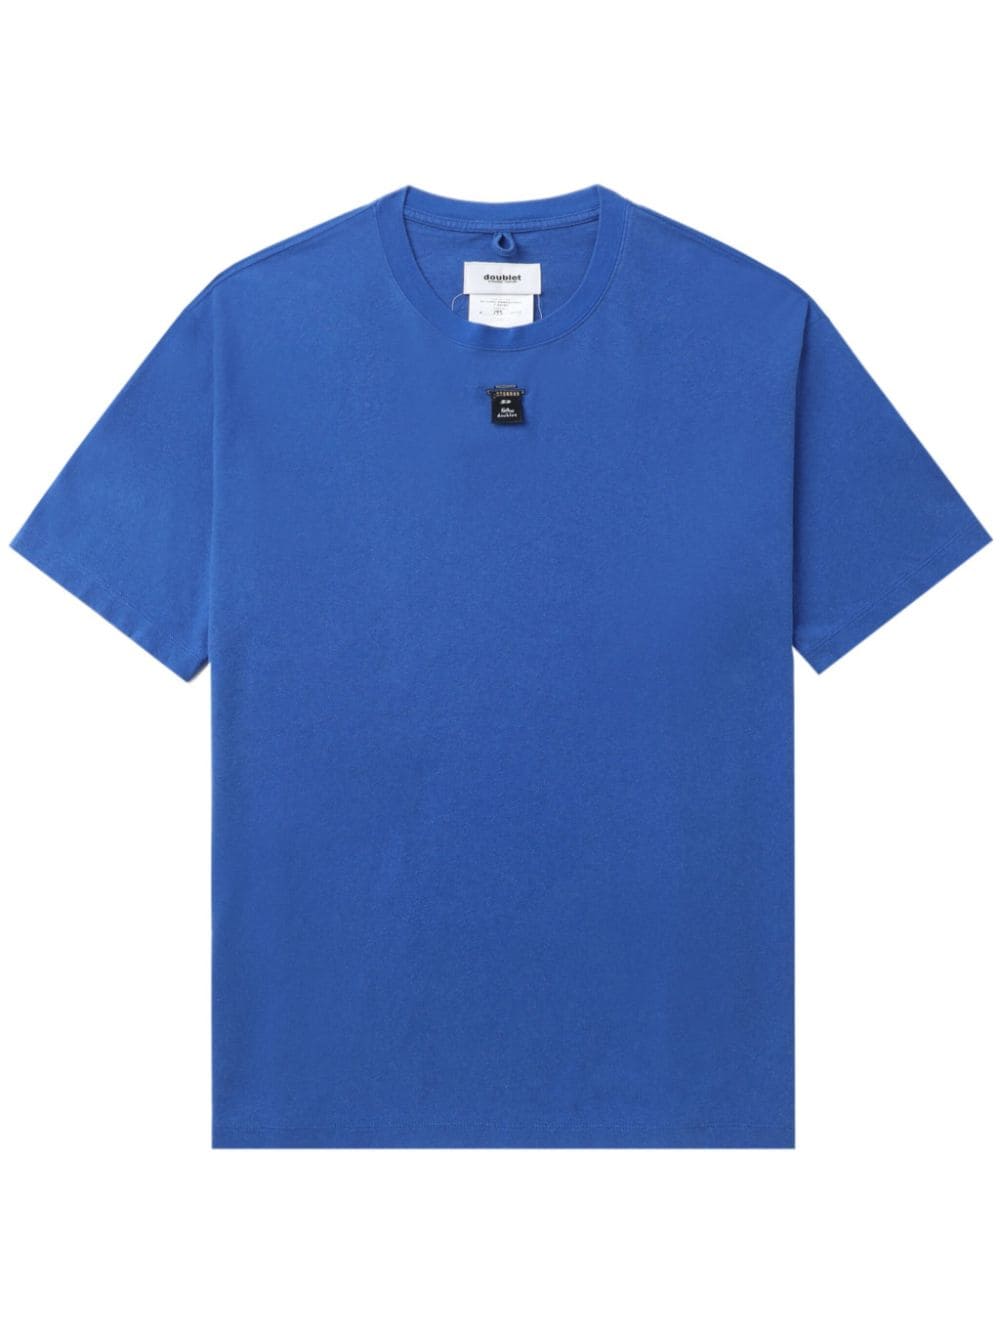 Doublet SD Card embroidered T-shirt - Blue von Doublet